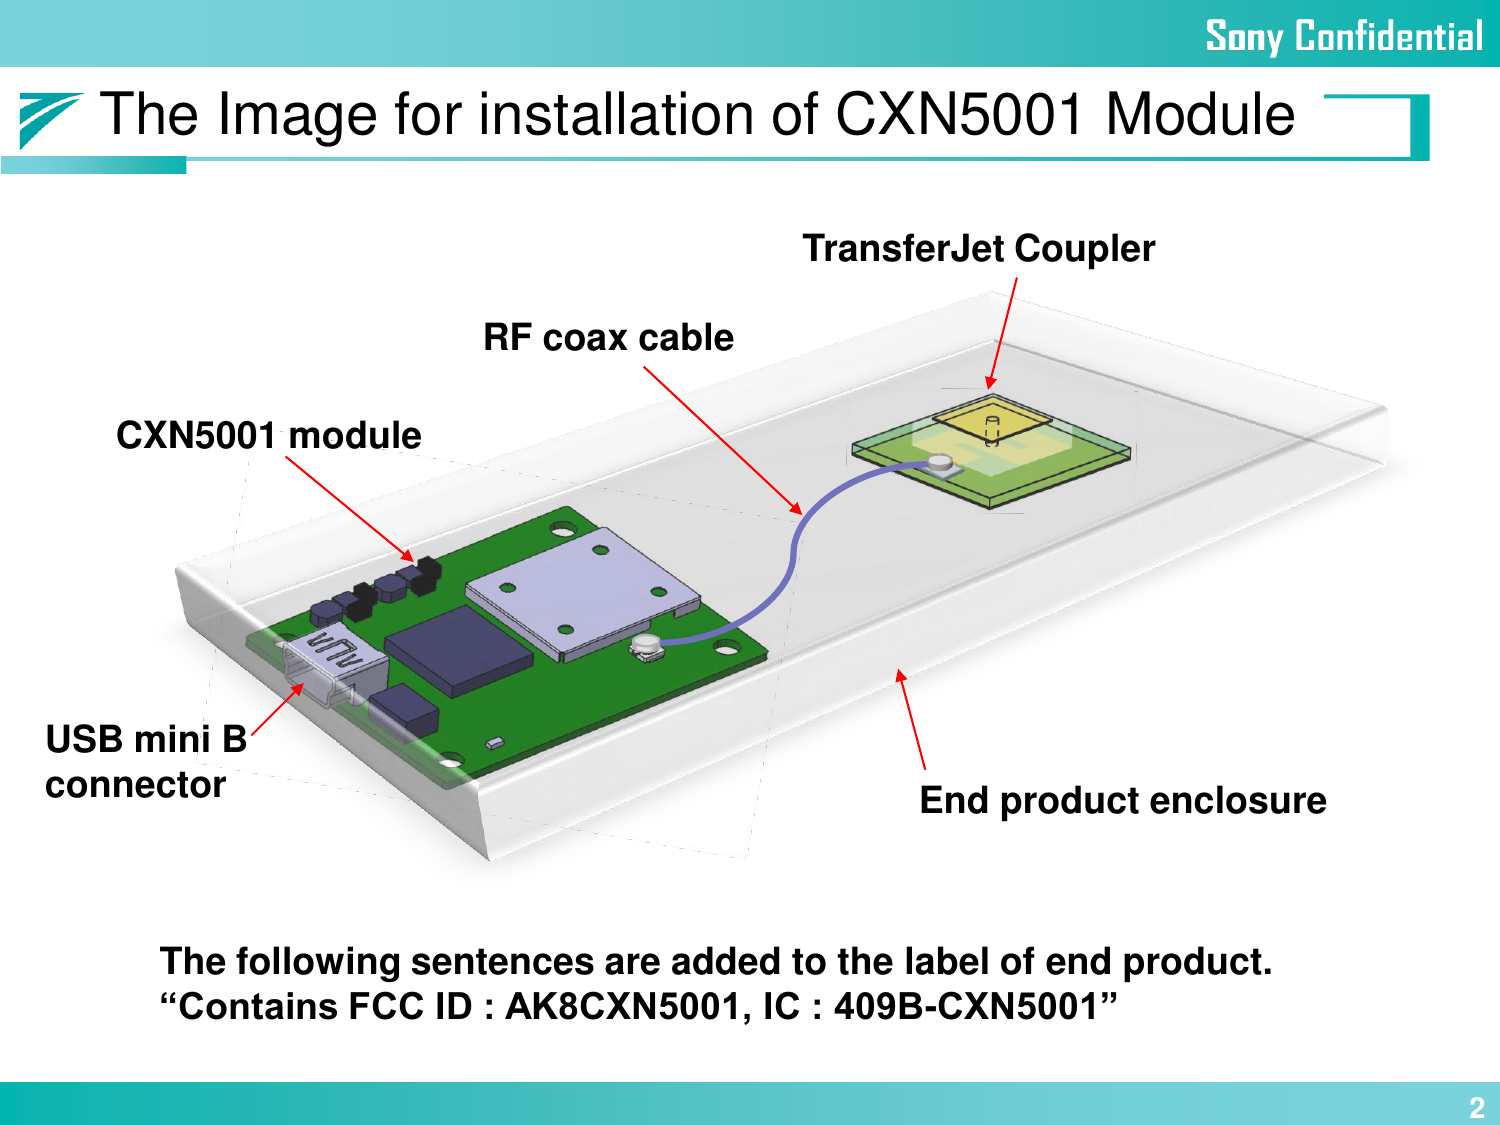 2The Image for installation of CXN5001 Module The following sentences are added to the label of end product. “Contains FCC ID : AK8CXN5001, IC : 409B-CXN5001”CXN5001 moduleRF coax cableTransferJet CouplerUSB mini B connector End product enclosure